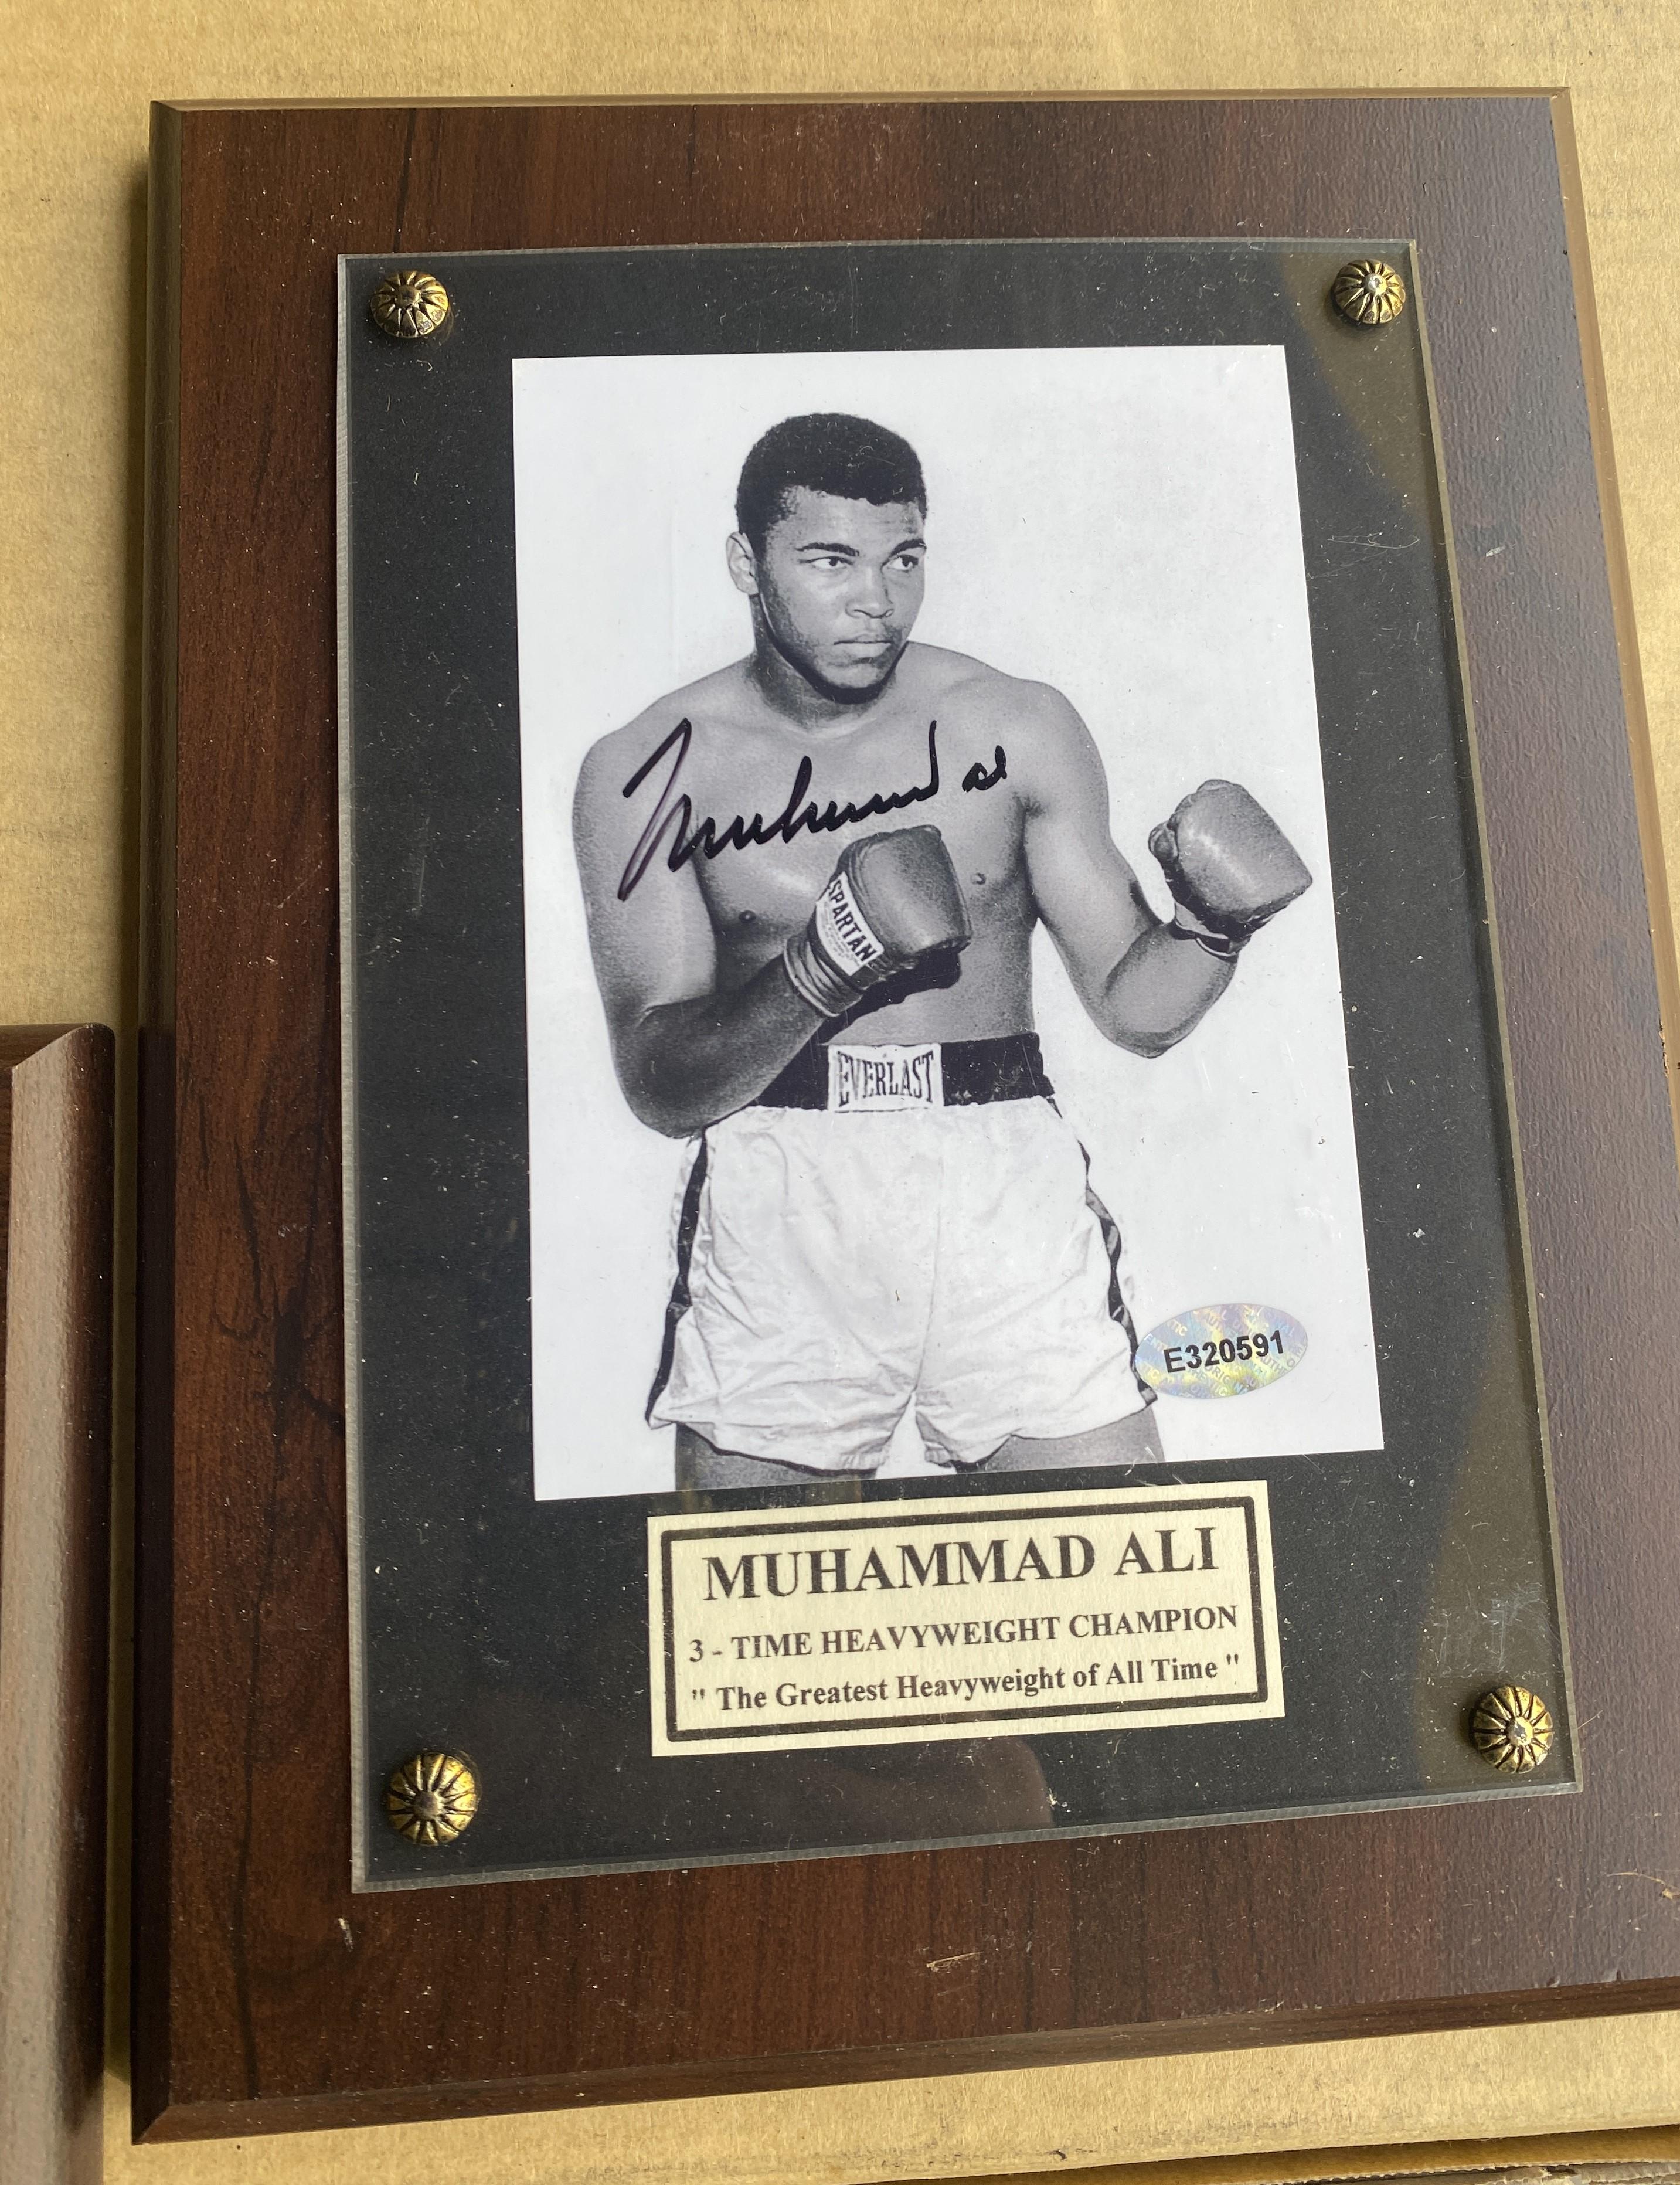 various Muhammad Ali Signed Photos These items are signed but not authenticated and are being sold a